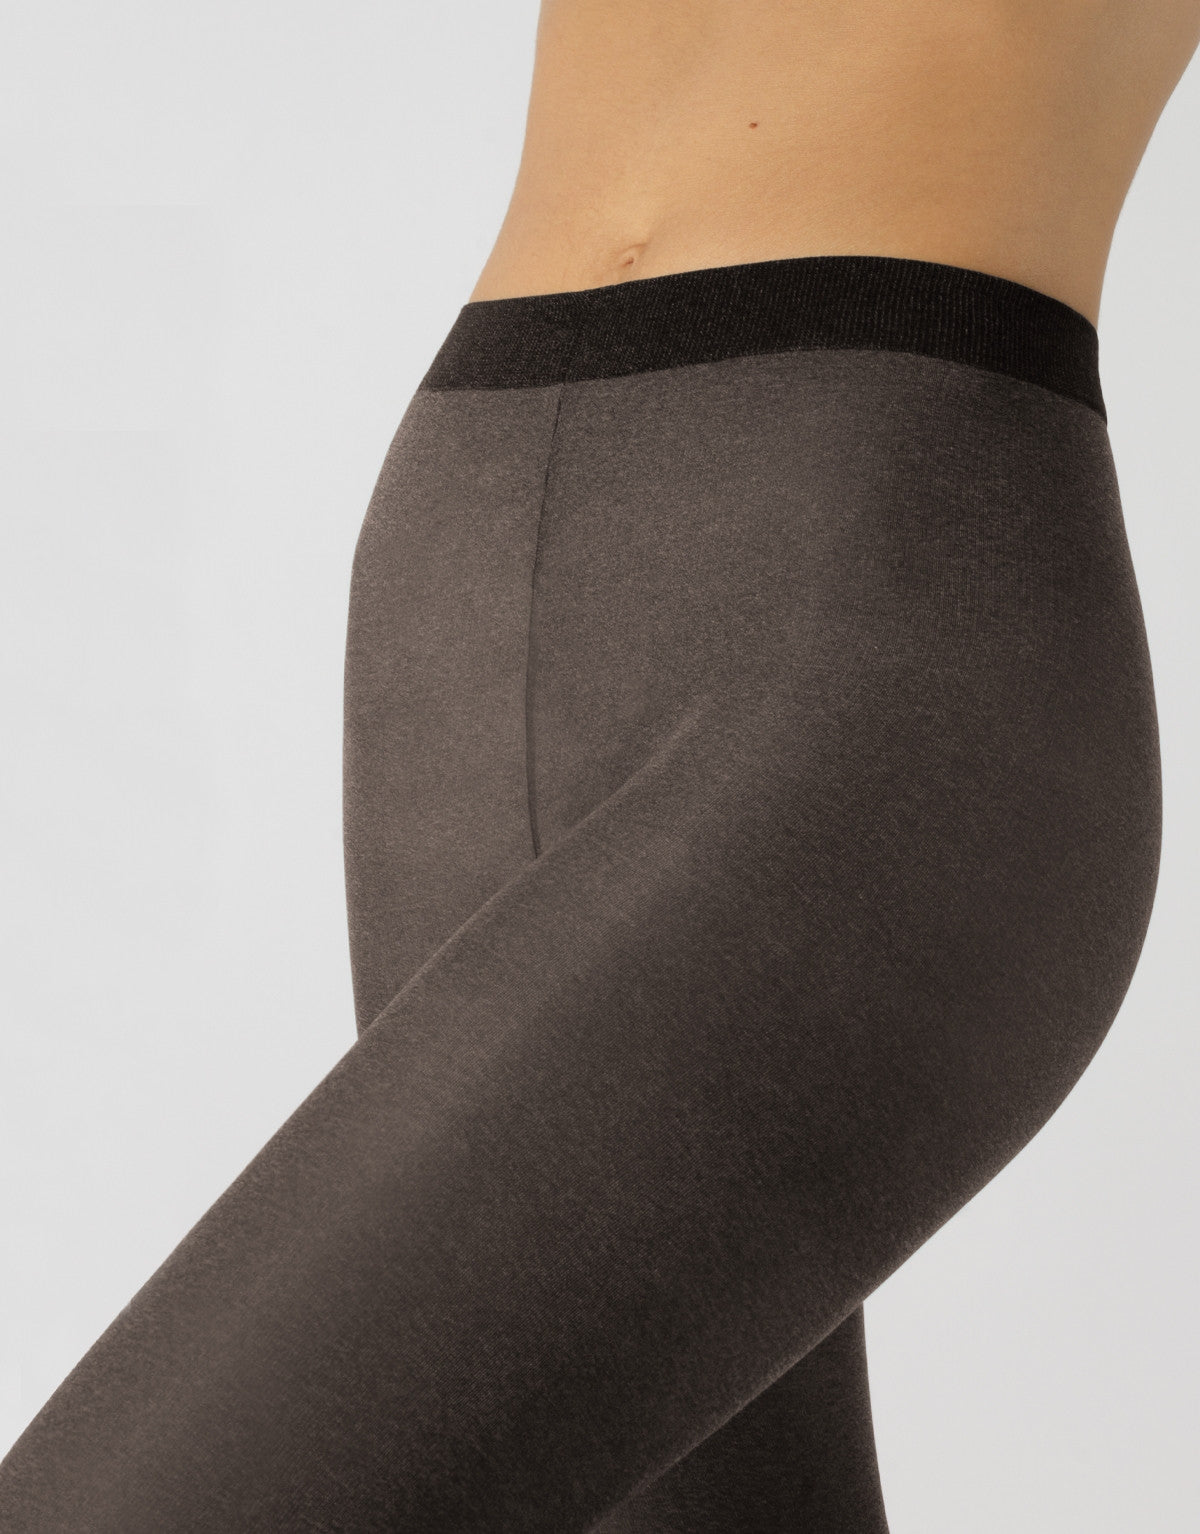 Calzitaly Melange Seam Tights - Dark grey black opaque fashion tights with a knitted fleck effect, white back seam.